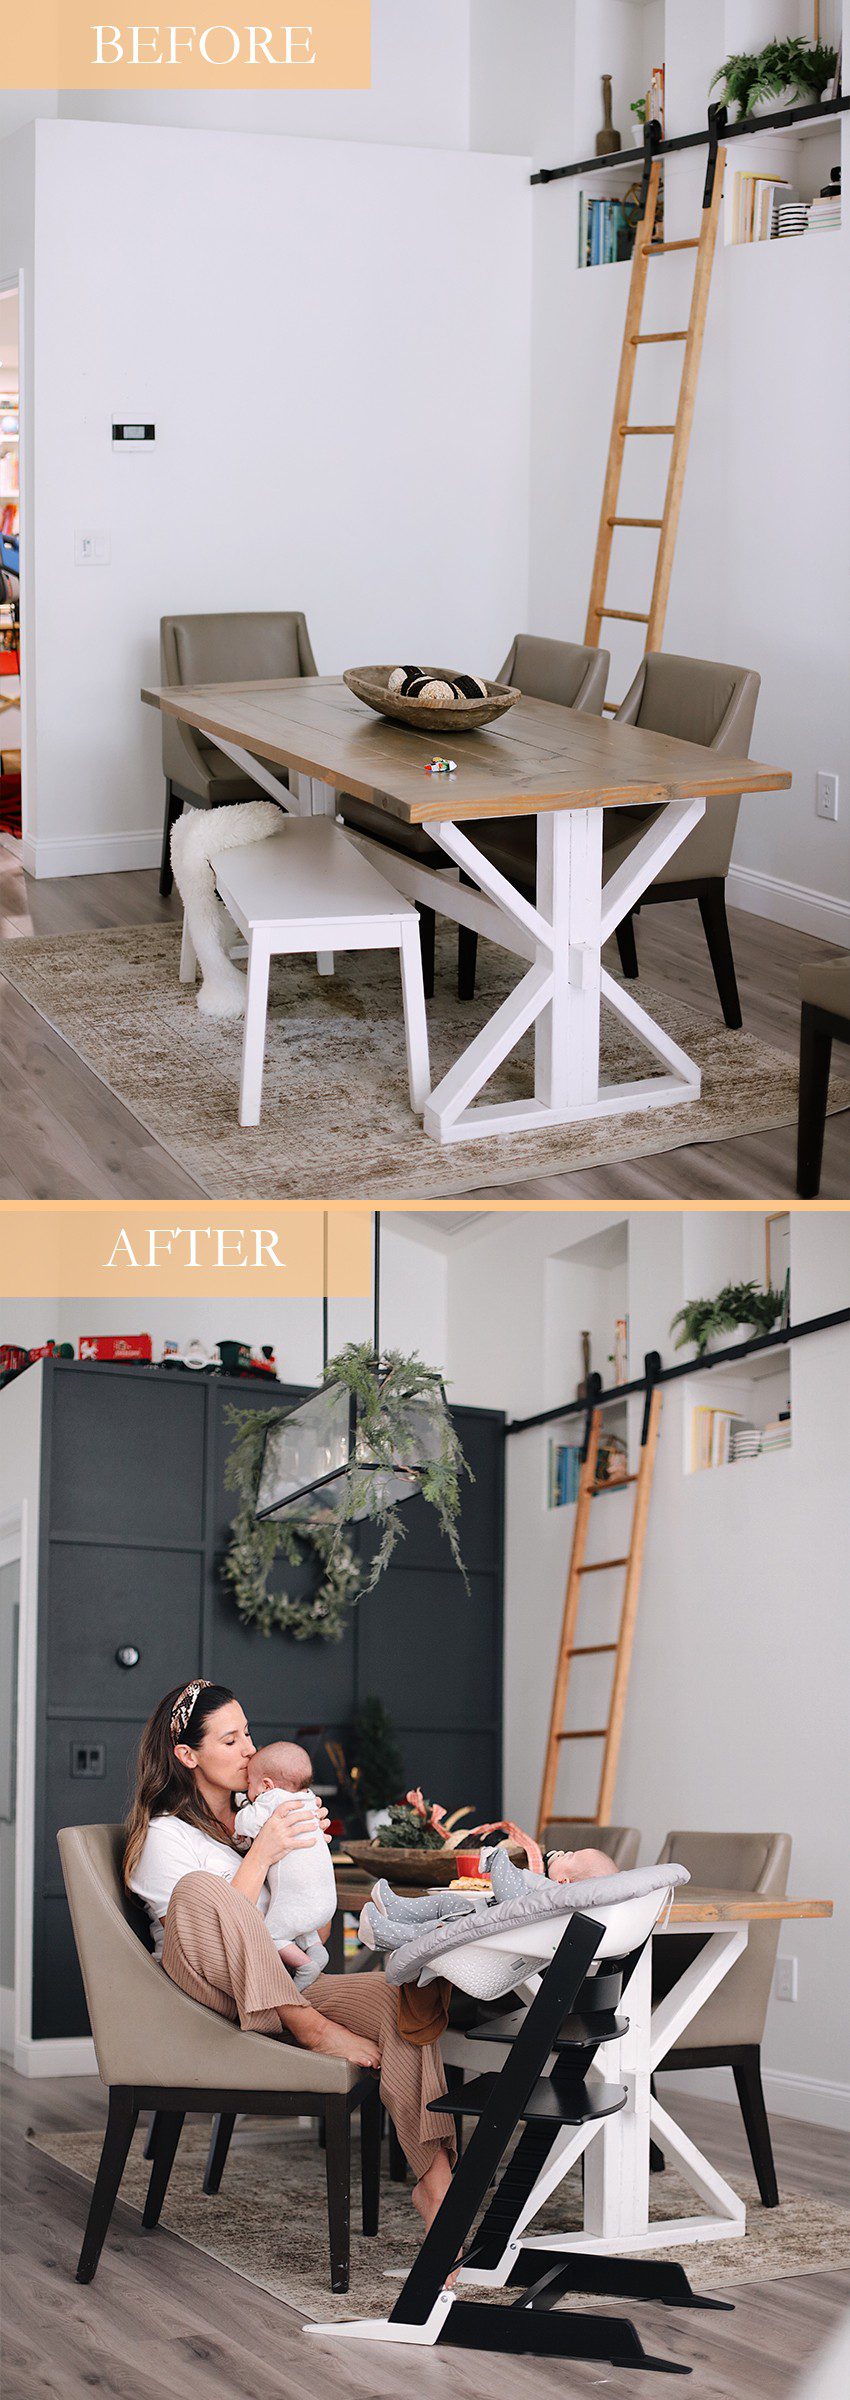 Tutorial: DIY Wood Grid Wall! How to create a stunning and bold accent wall with a DIY wooden grid. Click for the full tutorial. | Tutorial: Board and Batten Grid Wall by popular Florida DIY blog, Fresh Mommy Blog: before and after image of a dining area with a board and batten grid wall.